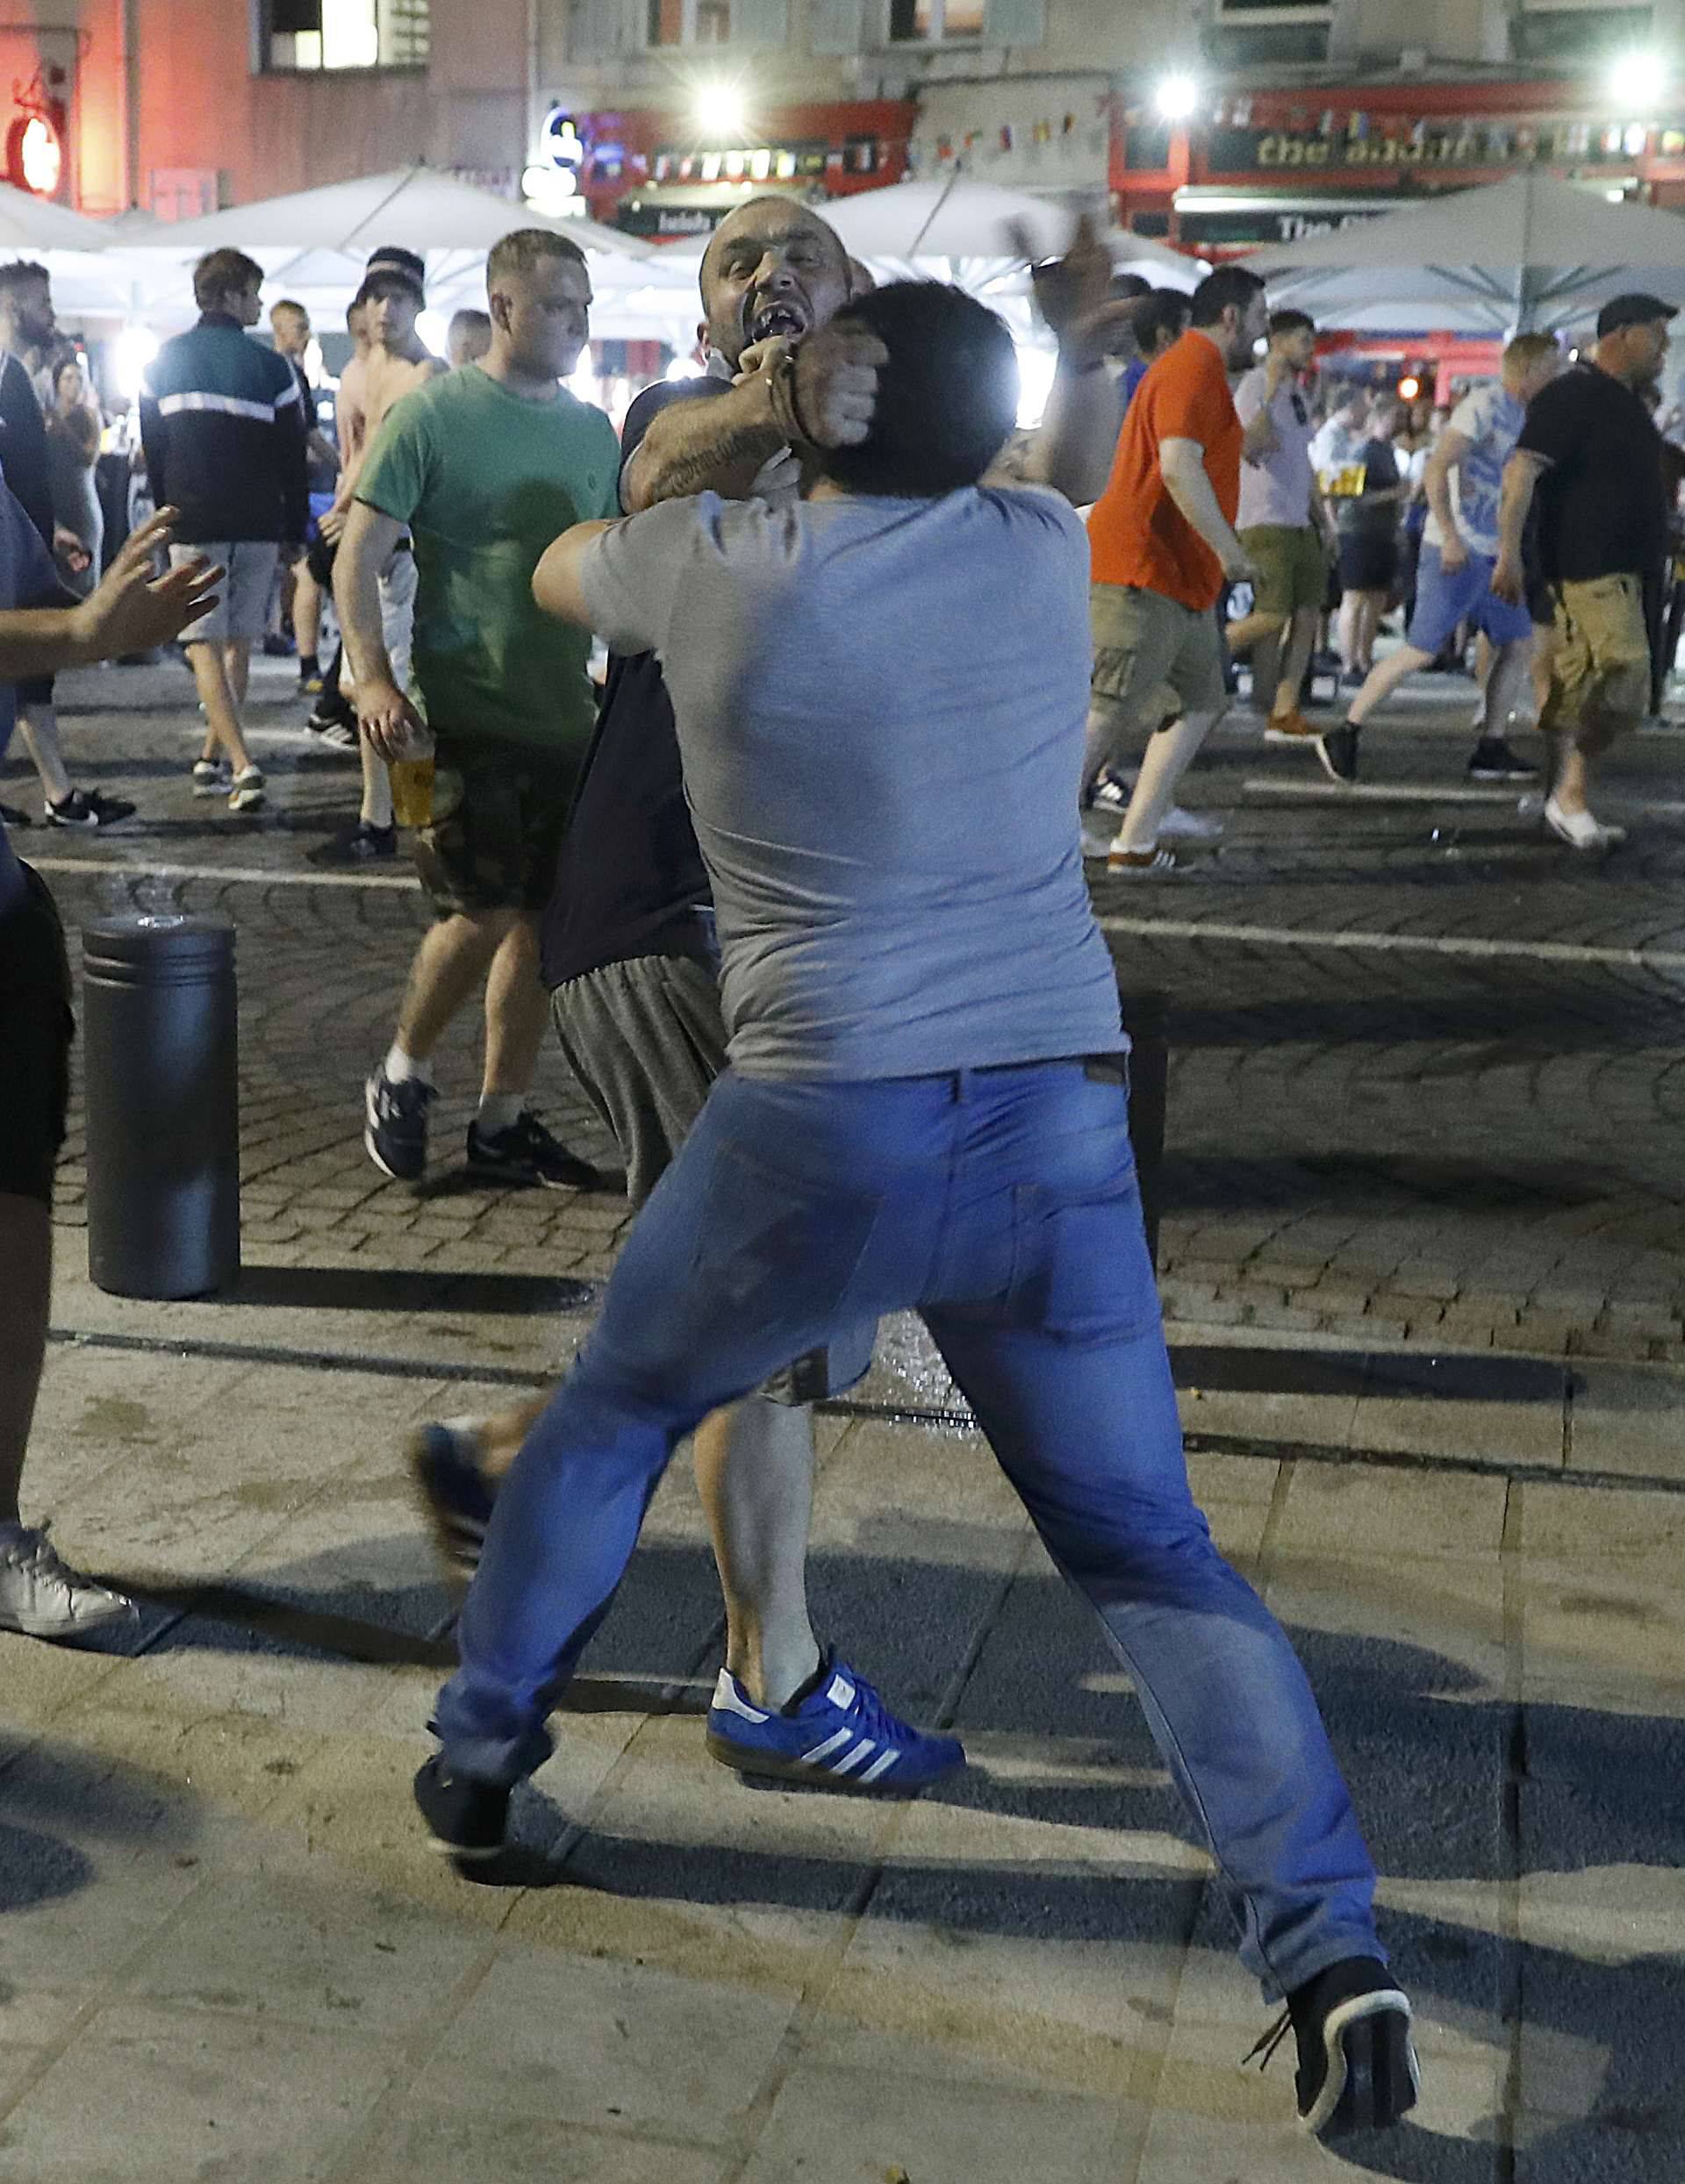 Local youths and supporters clash ahead of England's EURO 2016 match against Russia in Marseille